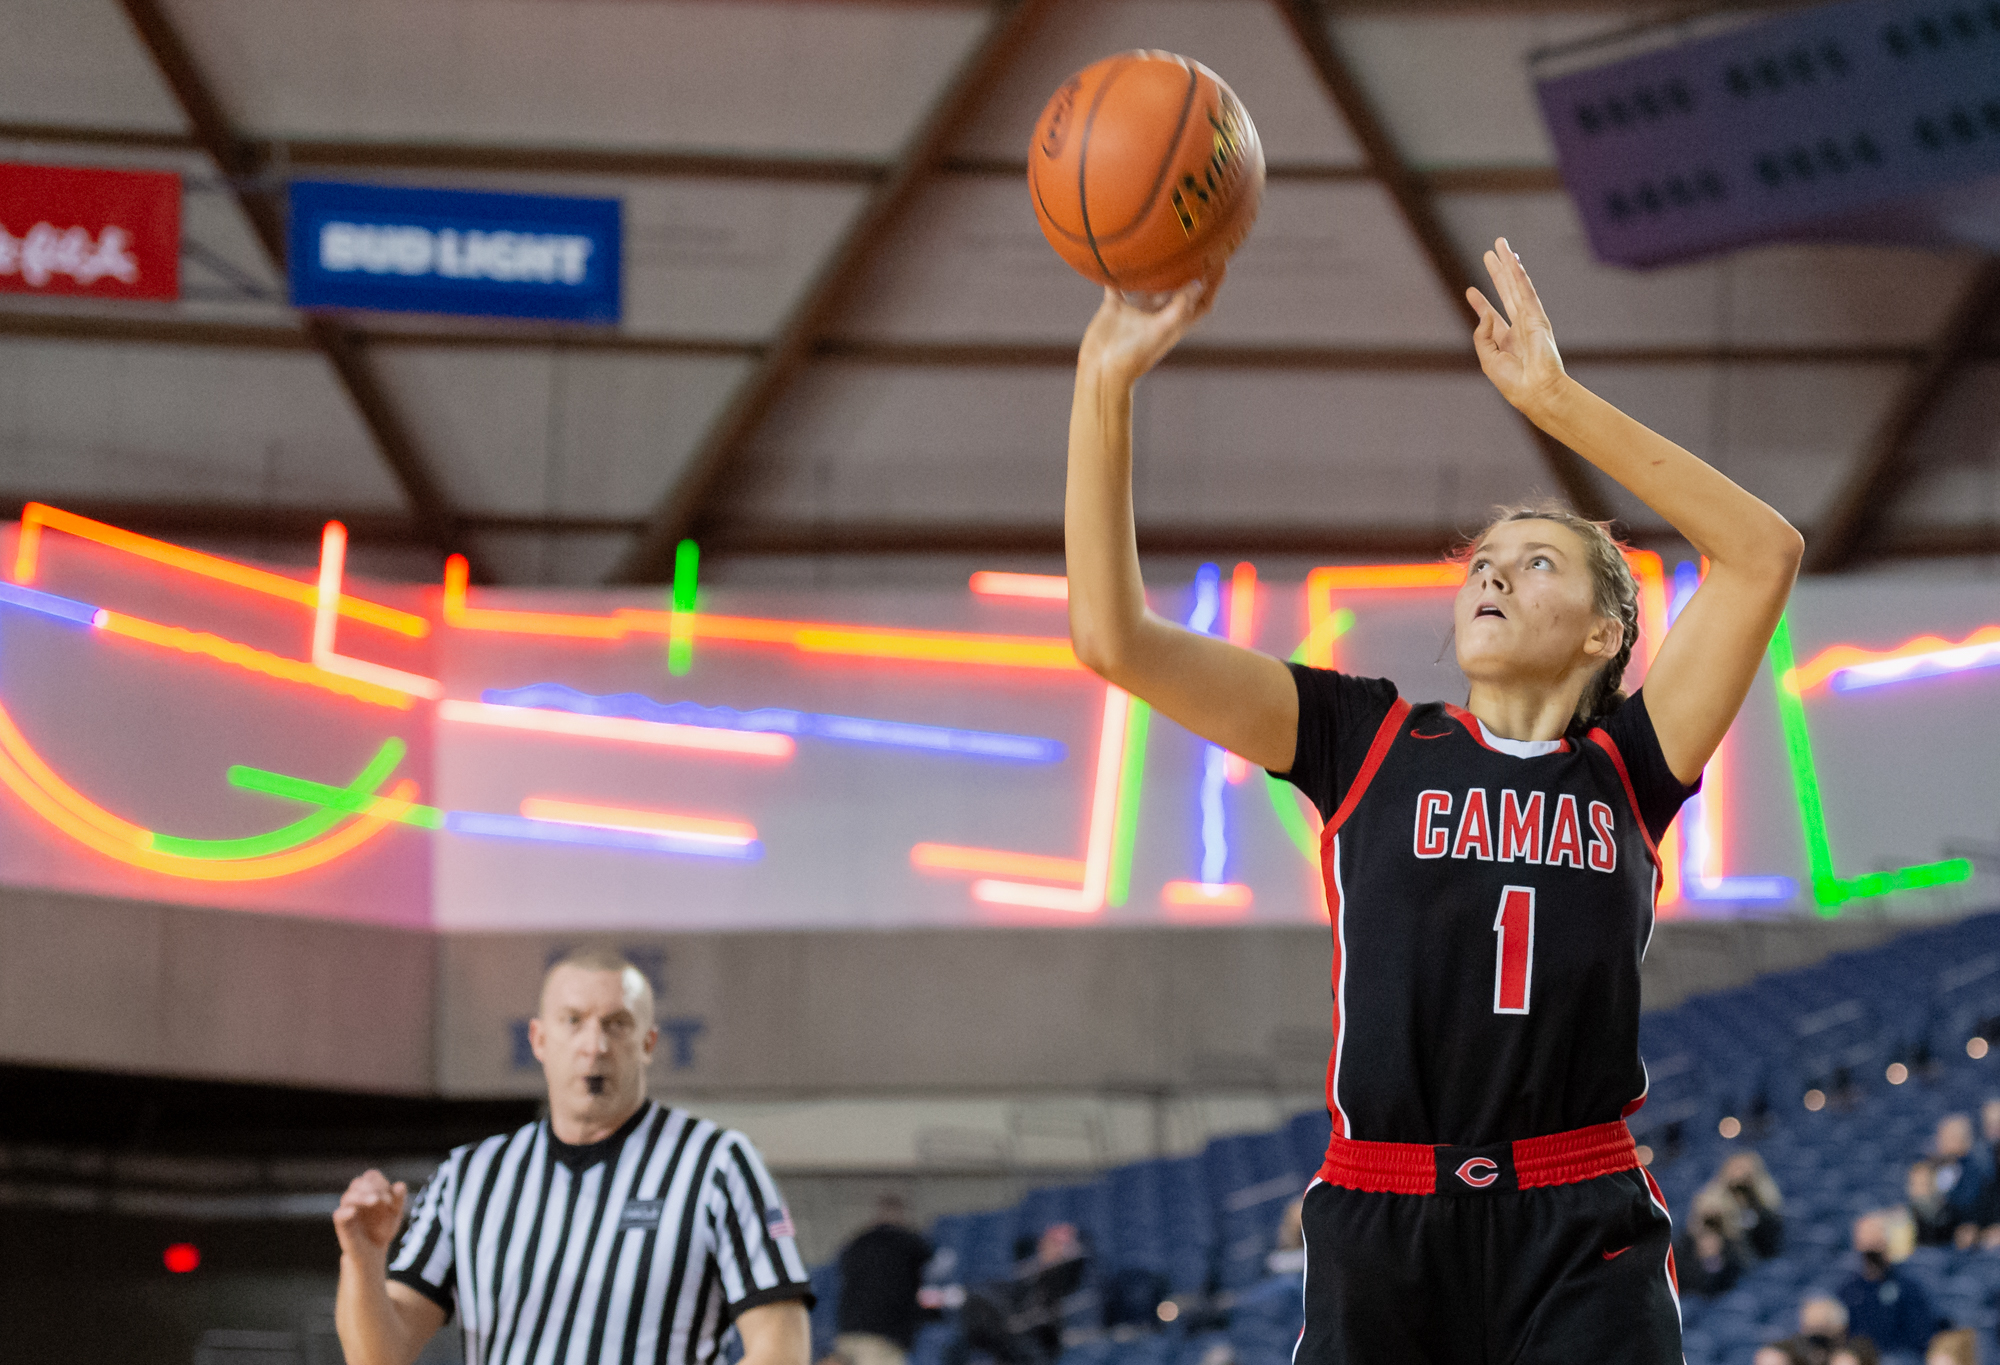 Camas' Reagan Jamison shoots a 3-pointer in the 4A State Girls Basketball tournament on Wednesday, March 2, 2022, at the Tacoma Dome.